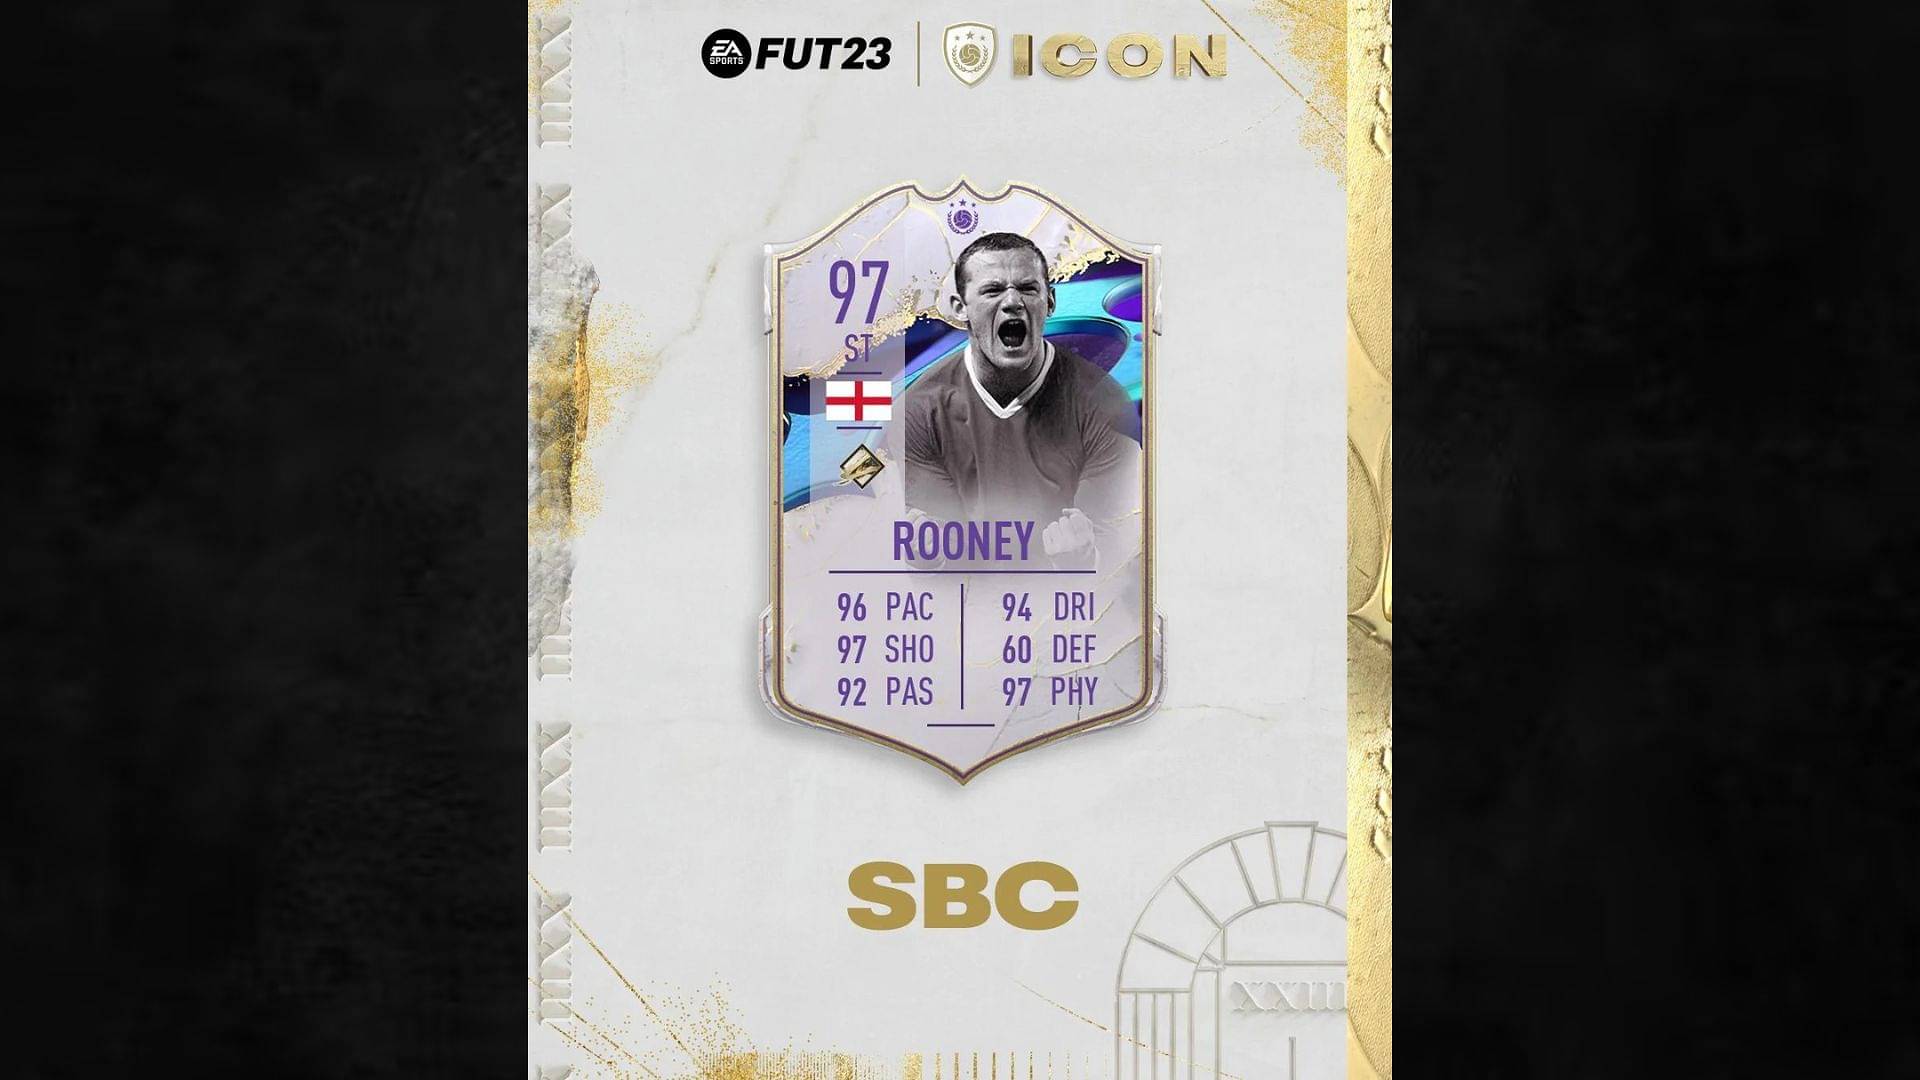 FIFA 23 Ronaldinho Cover Star Icon SBC: How to acquire this card in the  Ultimate Team? - The SportsRush